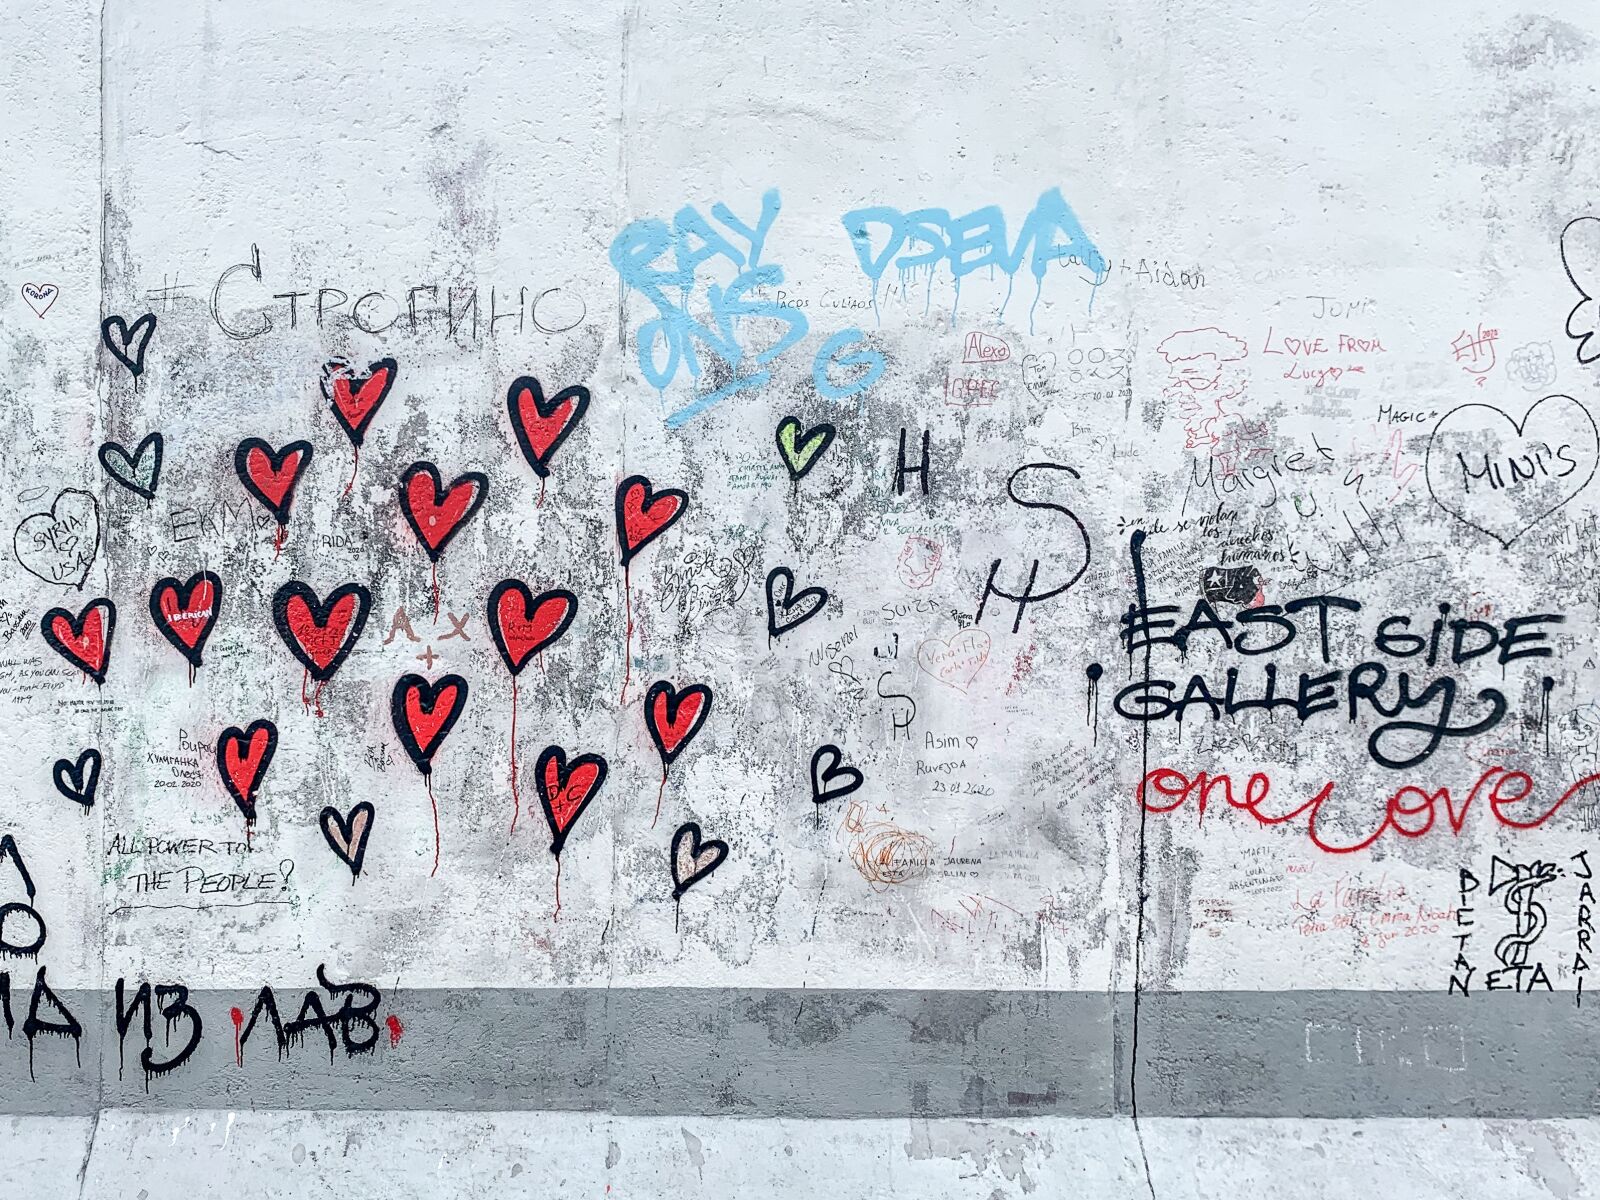 Apple iPhone XR sample photo. East side gallery, berlin photography